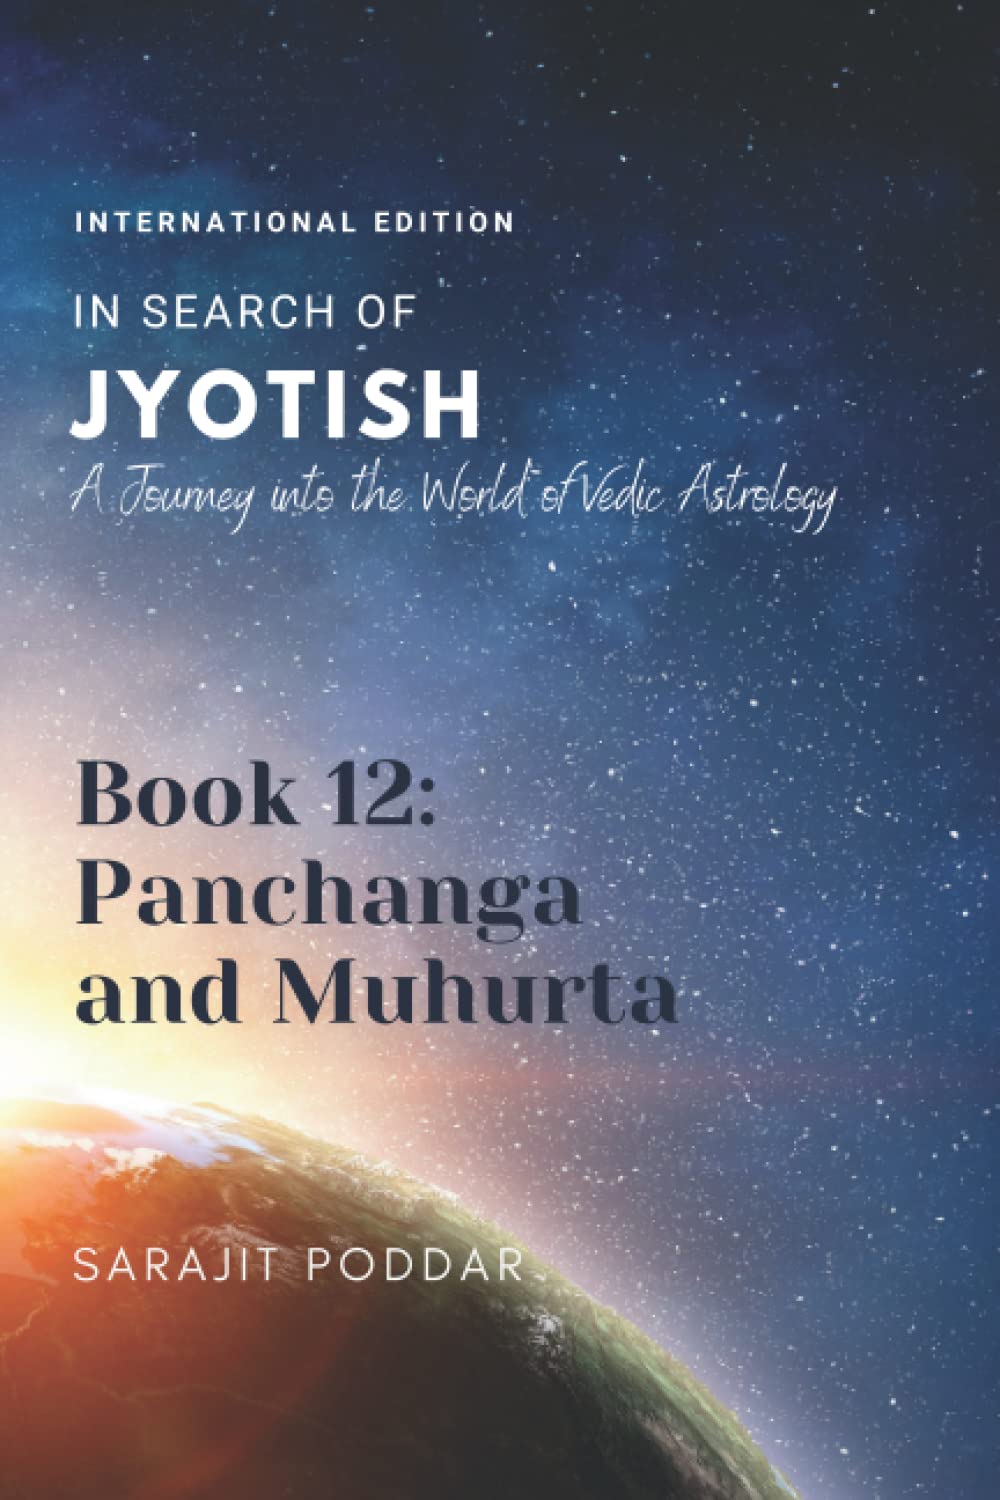 Panchanga and Muhurta: A Journey into the World of Vedic Astrology